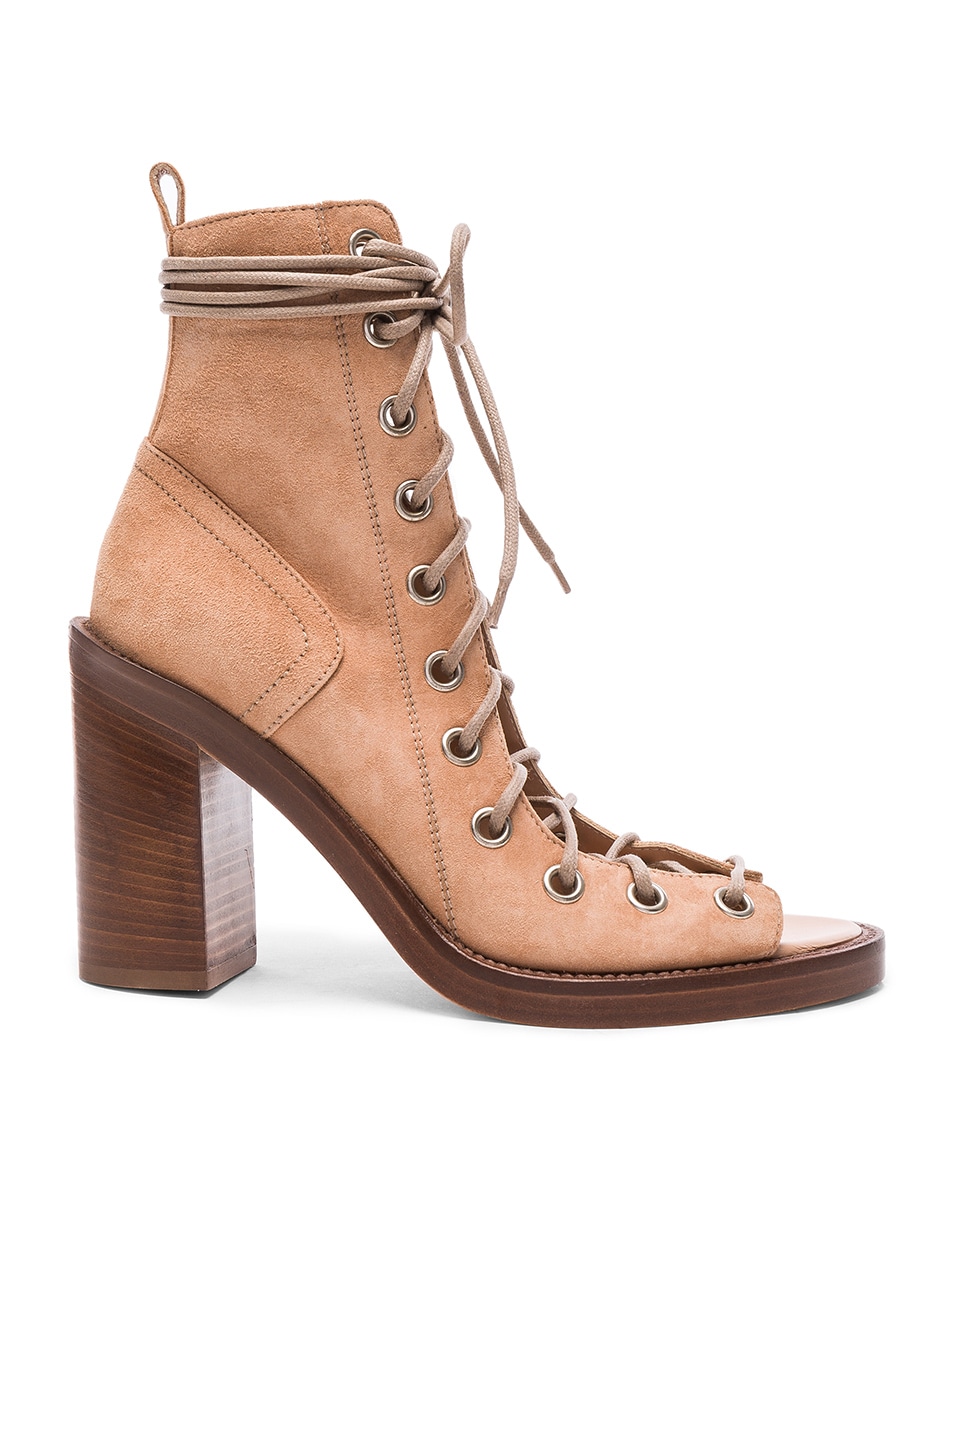 Image 1 of Ann Demeulemeester Suede Lace Up Heels in Peach